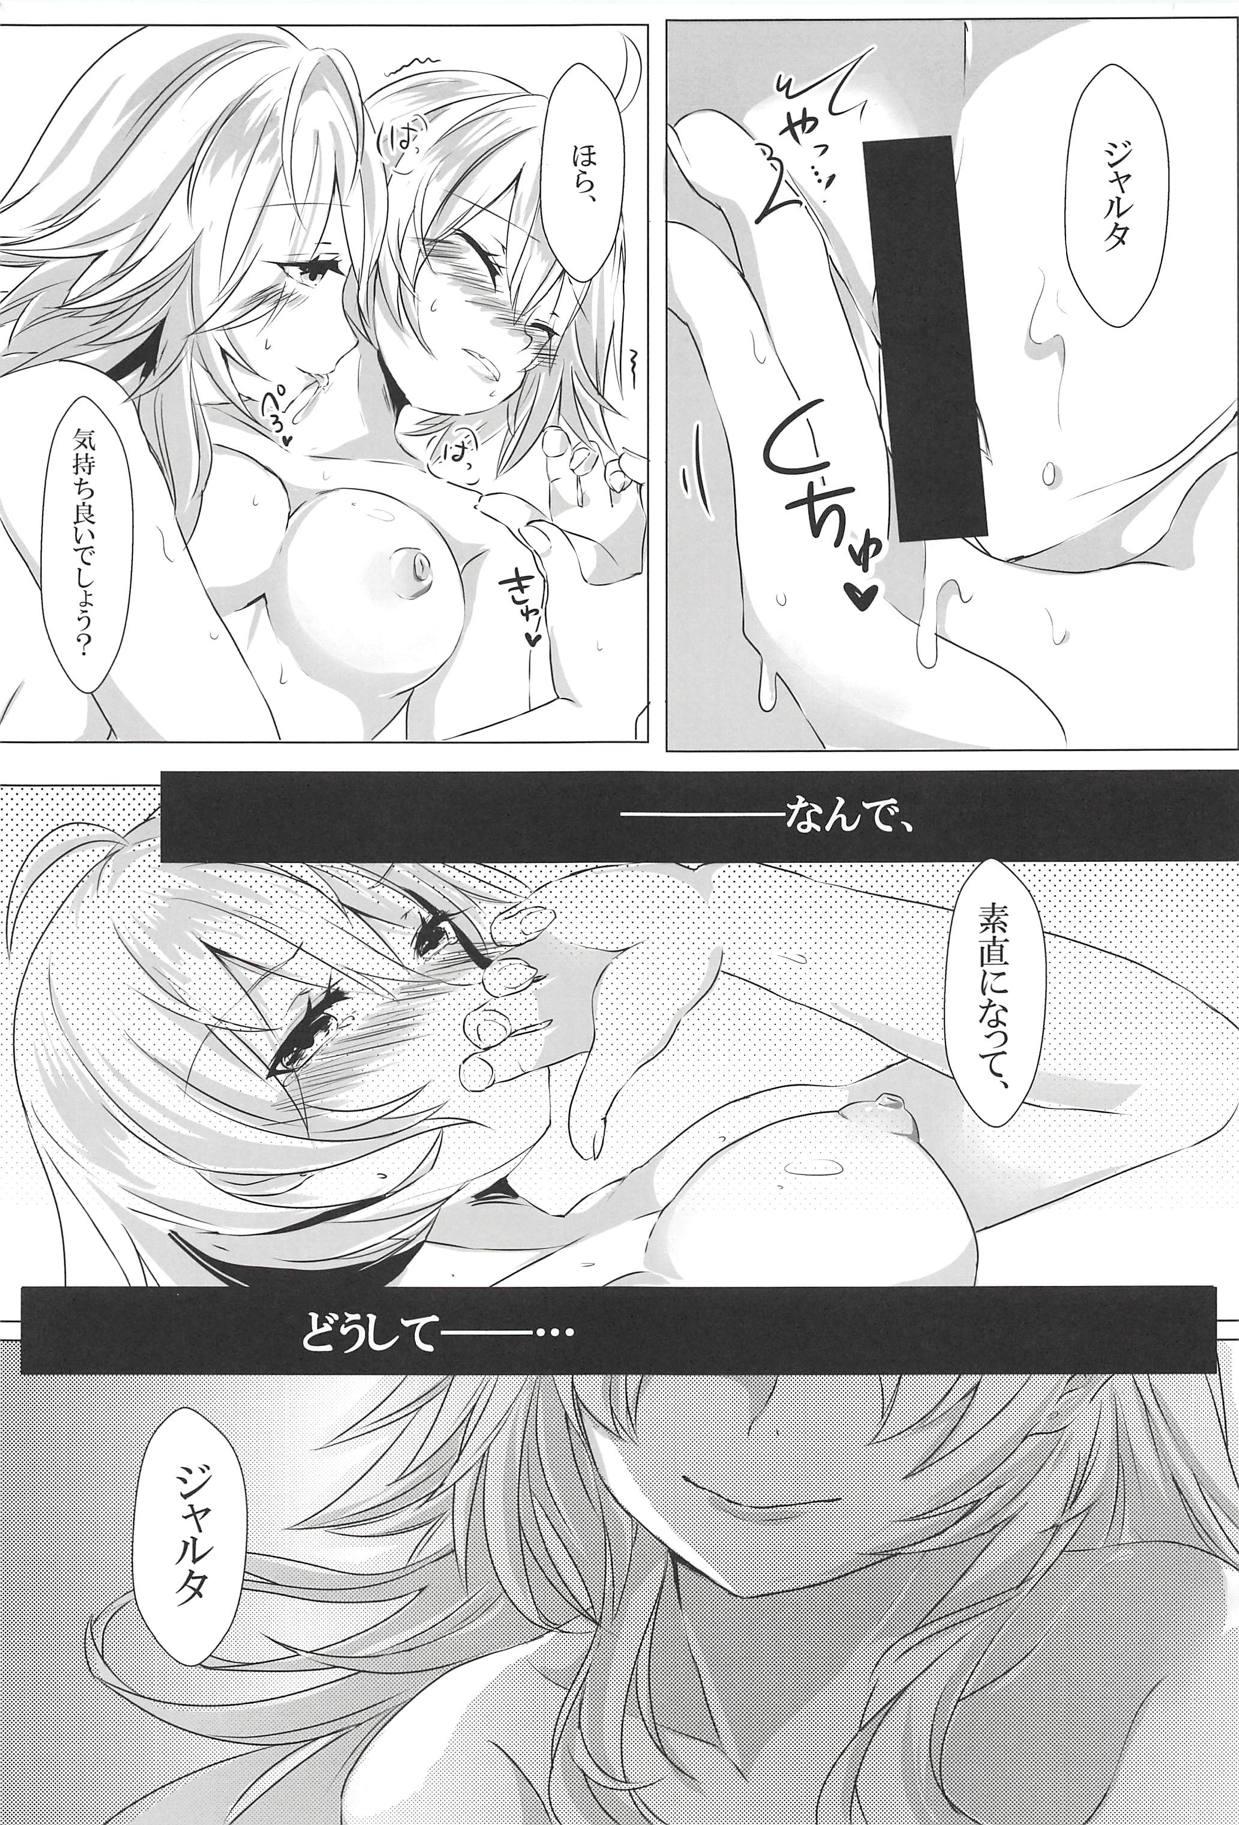 Mask TWIN SCANDAL - Fate grand order Woman - Page 6